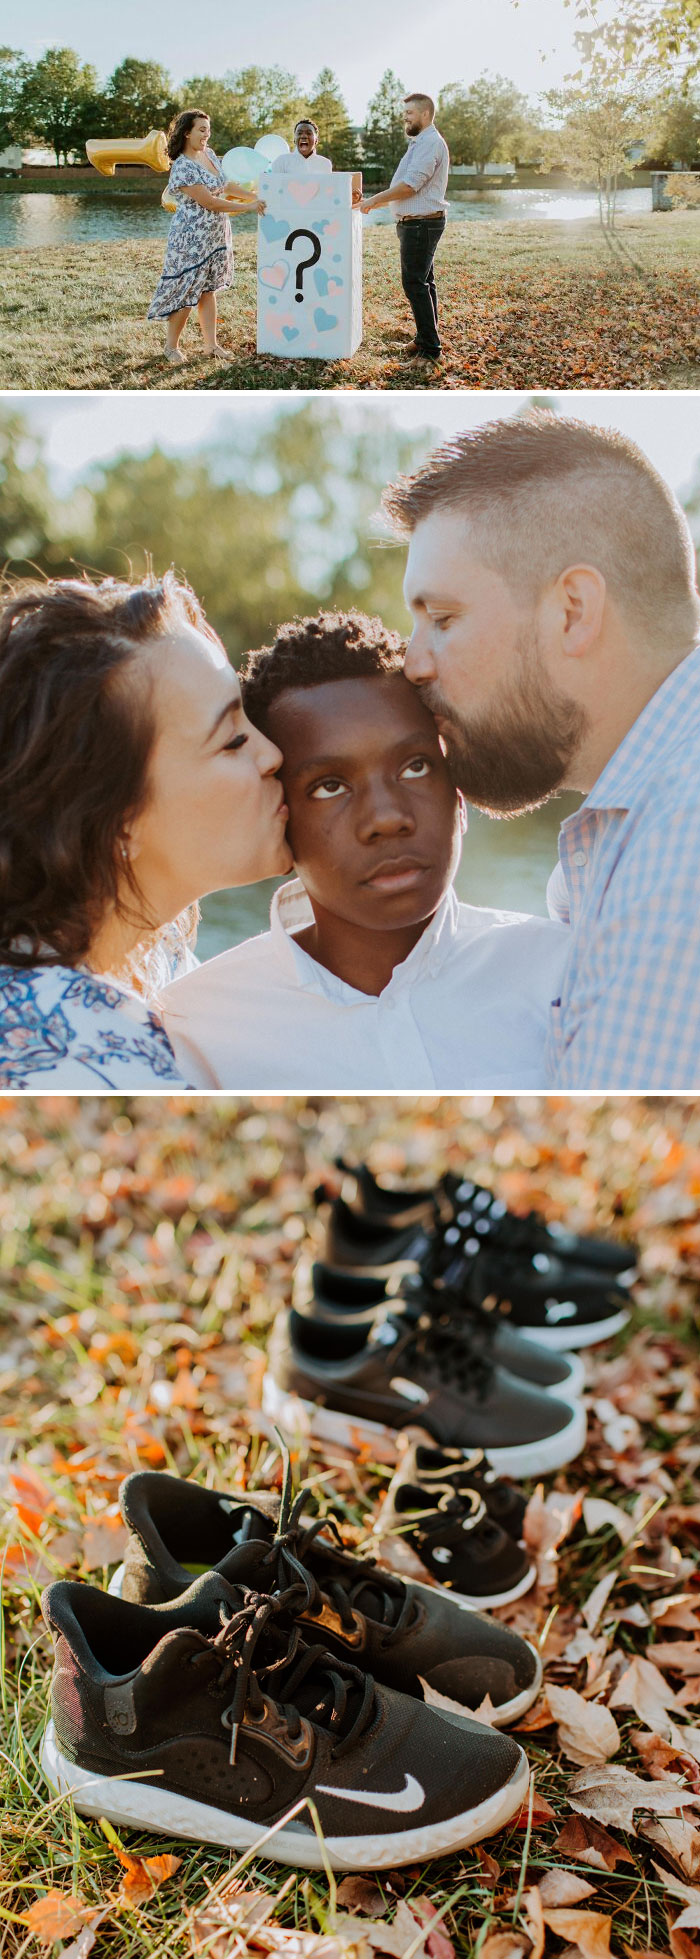 Had An "Adoption Reveal" Photo Shoot For Our Newly Adopted Teen, Complete With Teenage Eye Rolls